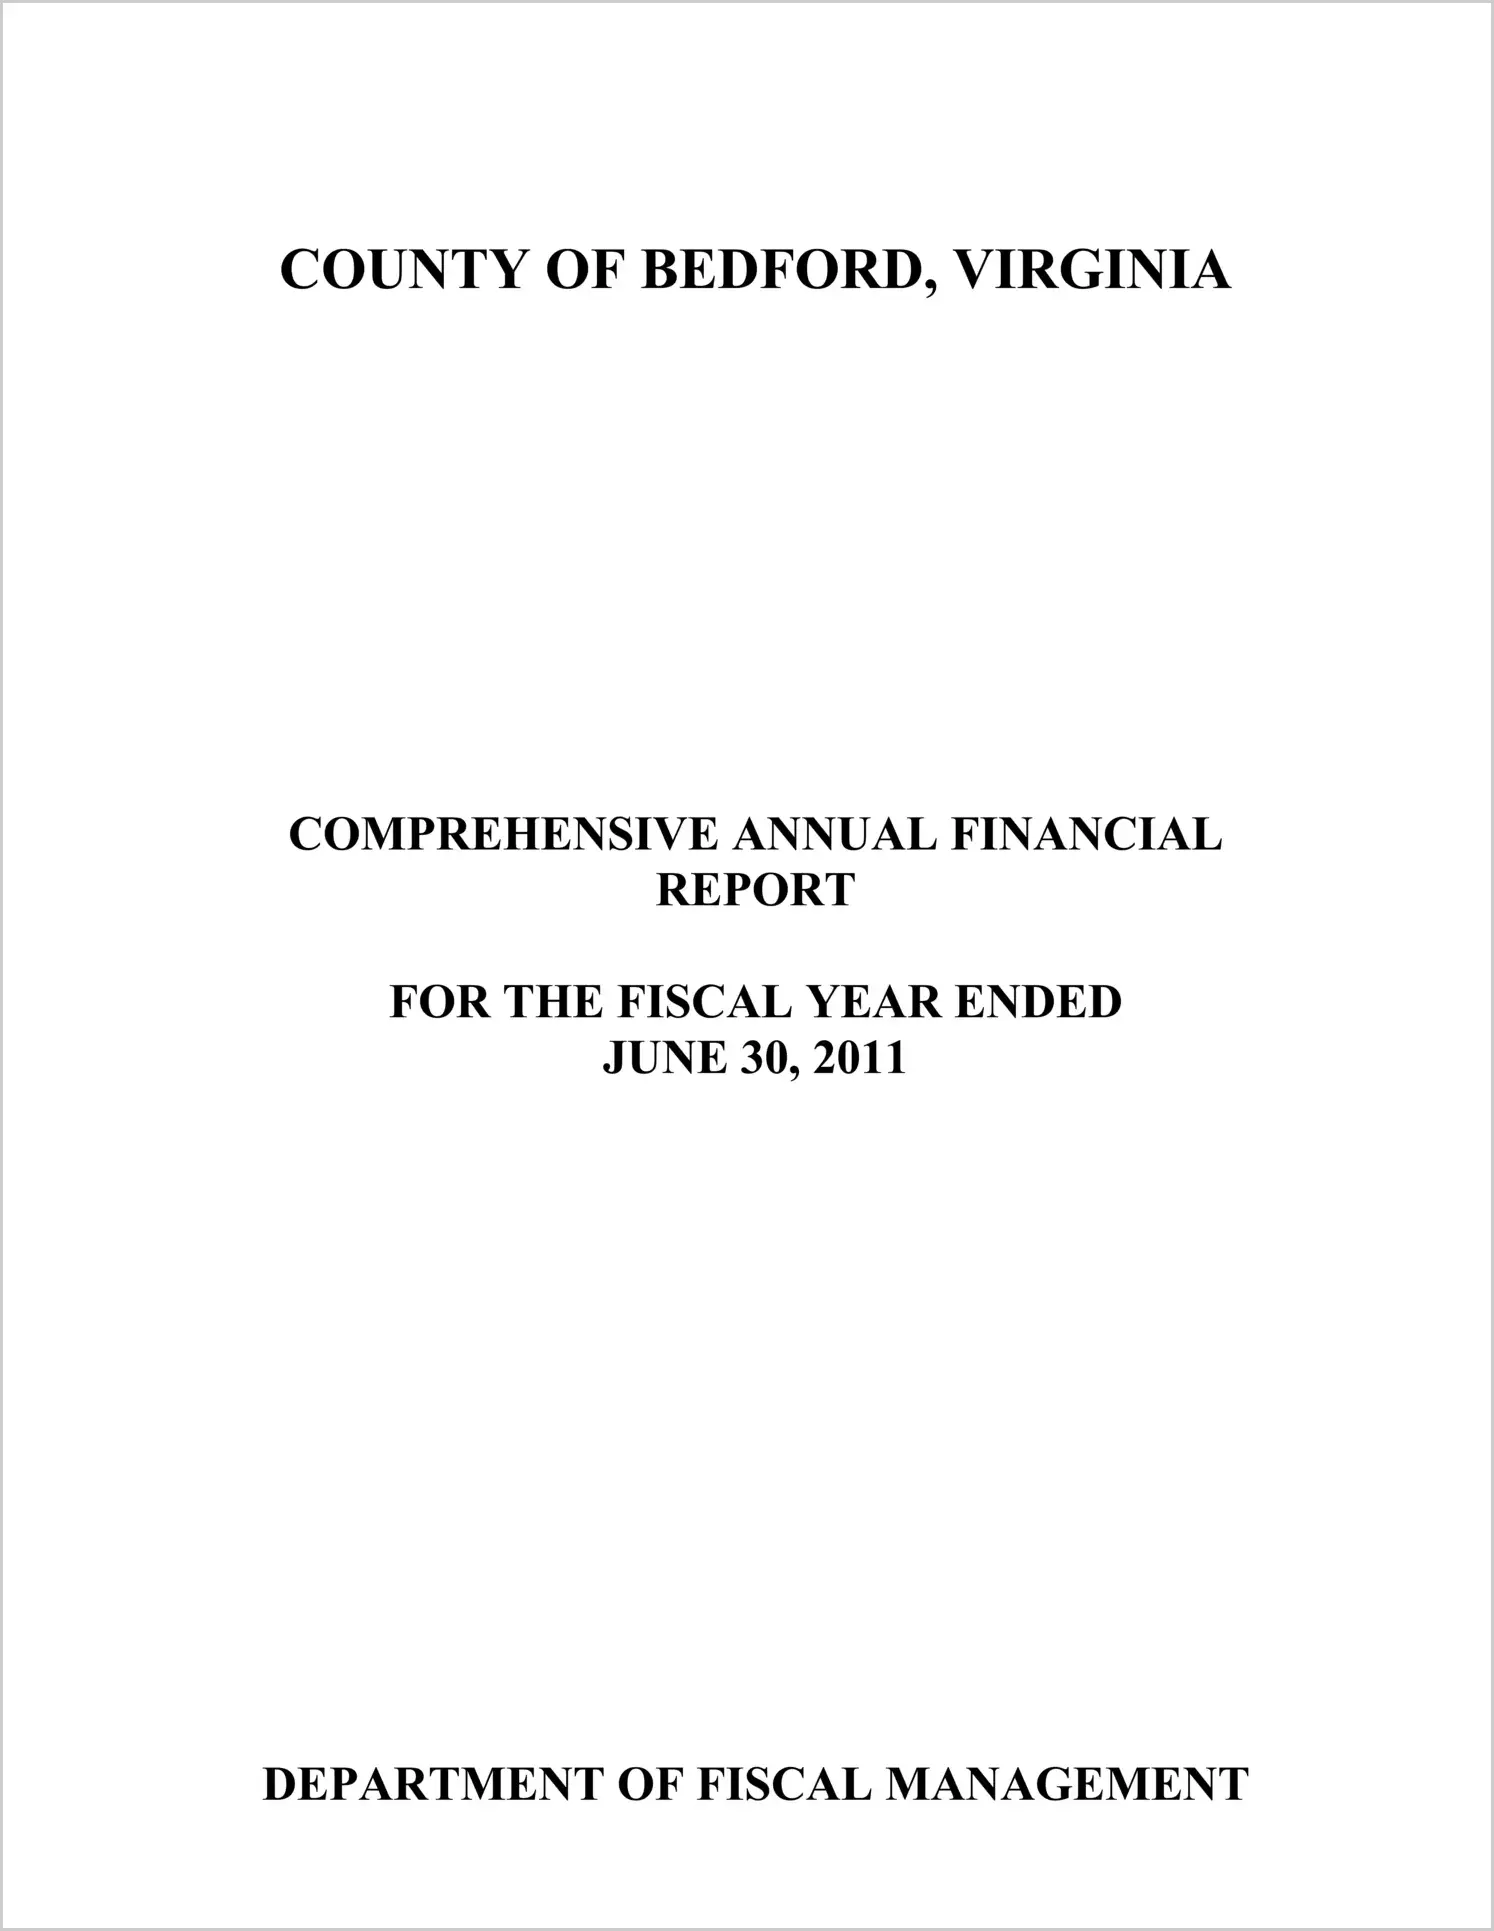 2011 Annual Financial Report for County of Bedford